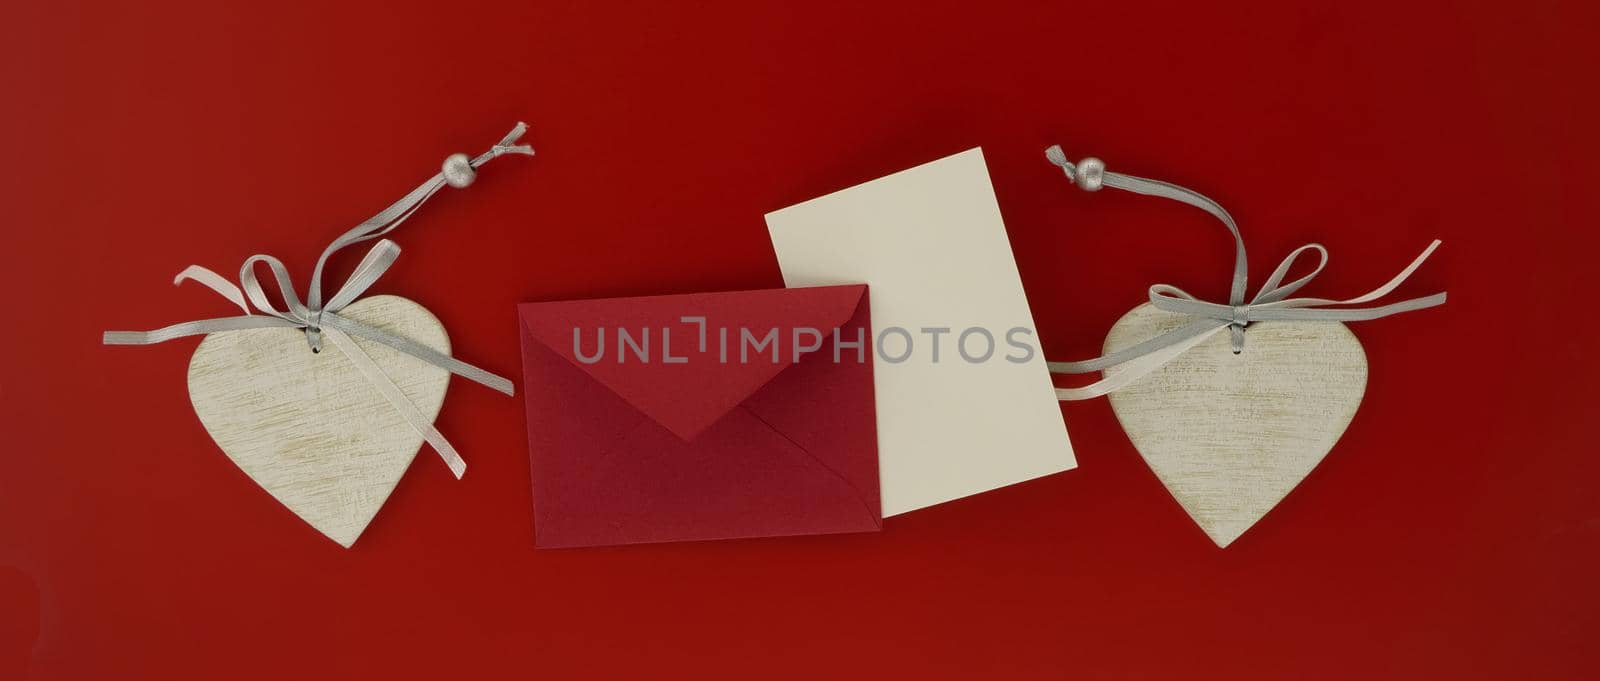 Valentines letter banner with decorative hearts and envelope over a matching red background in a concept of romance and love